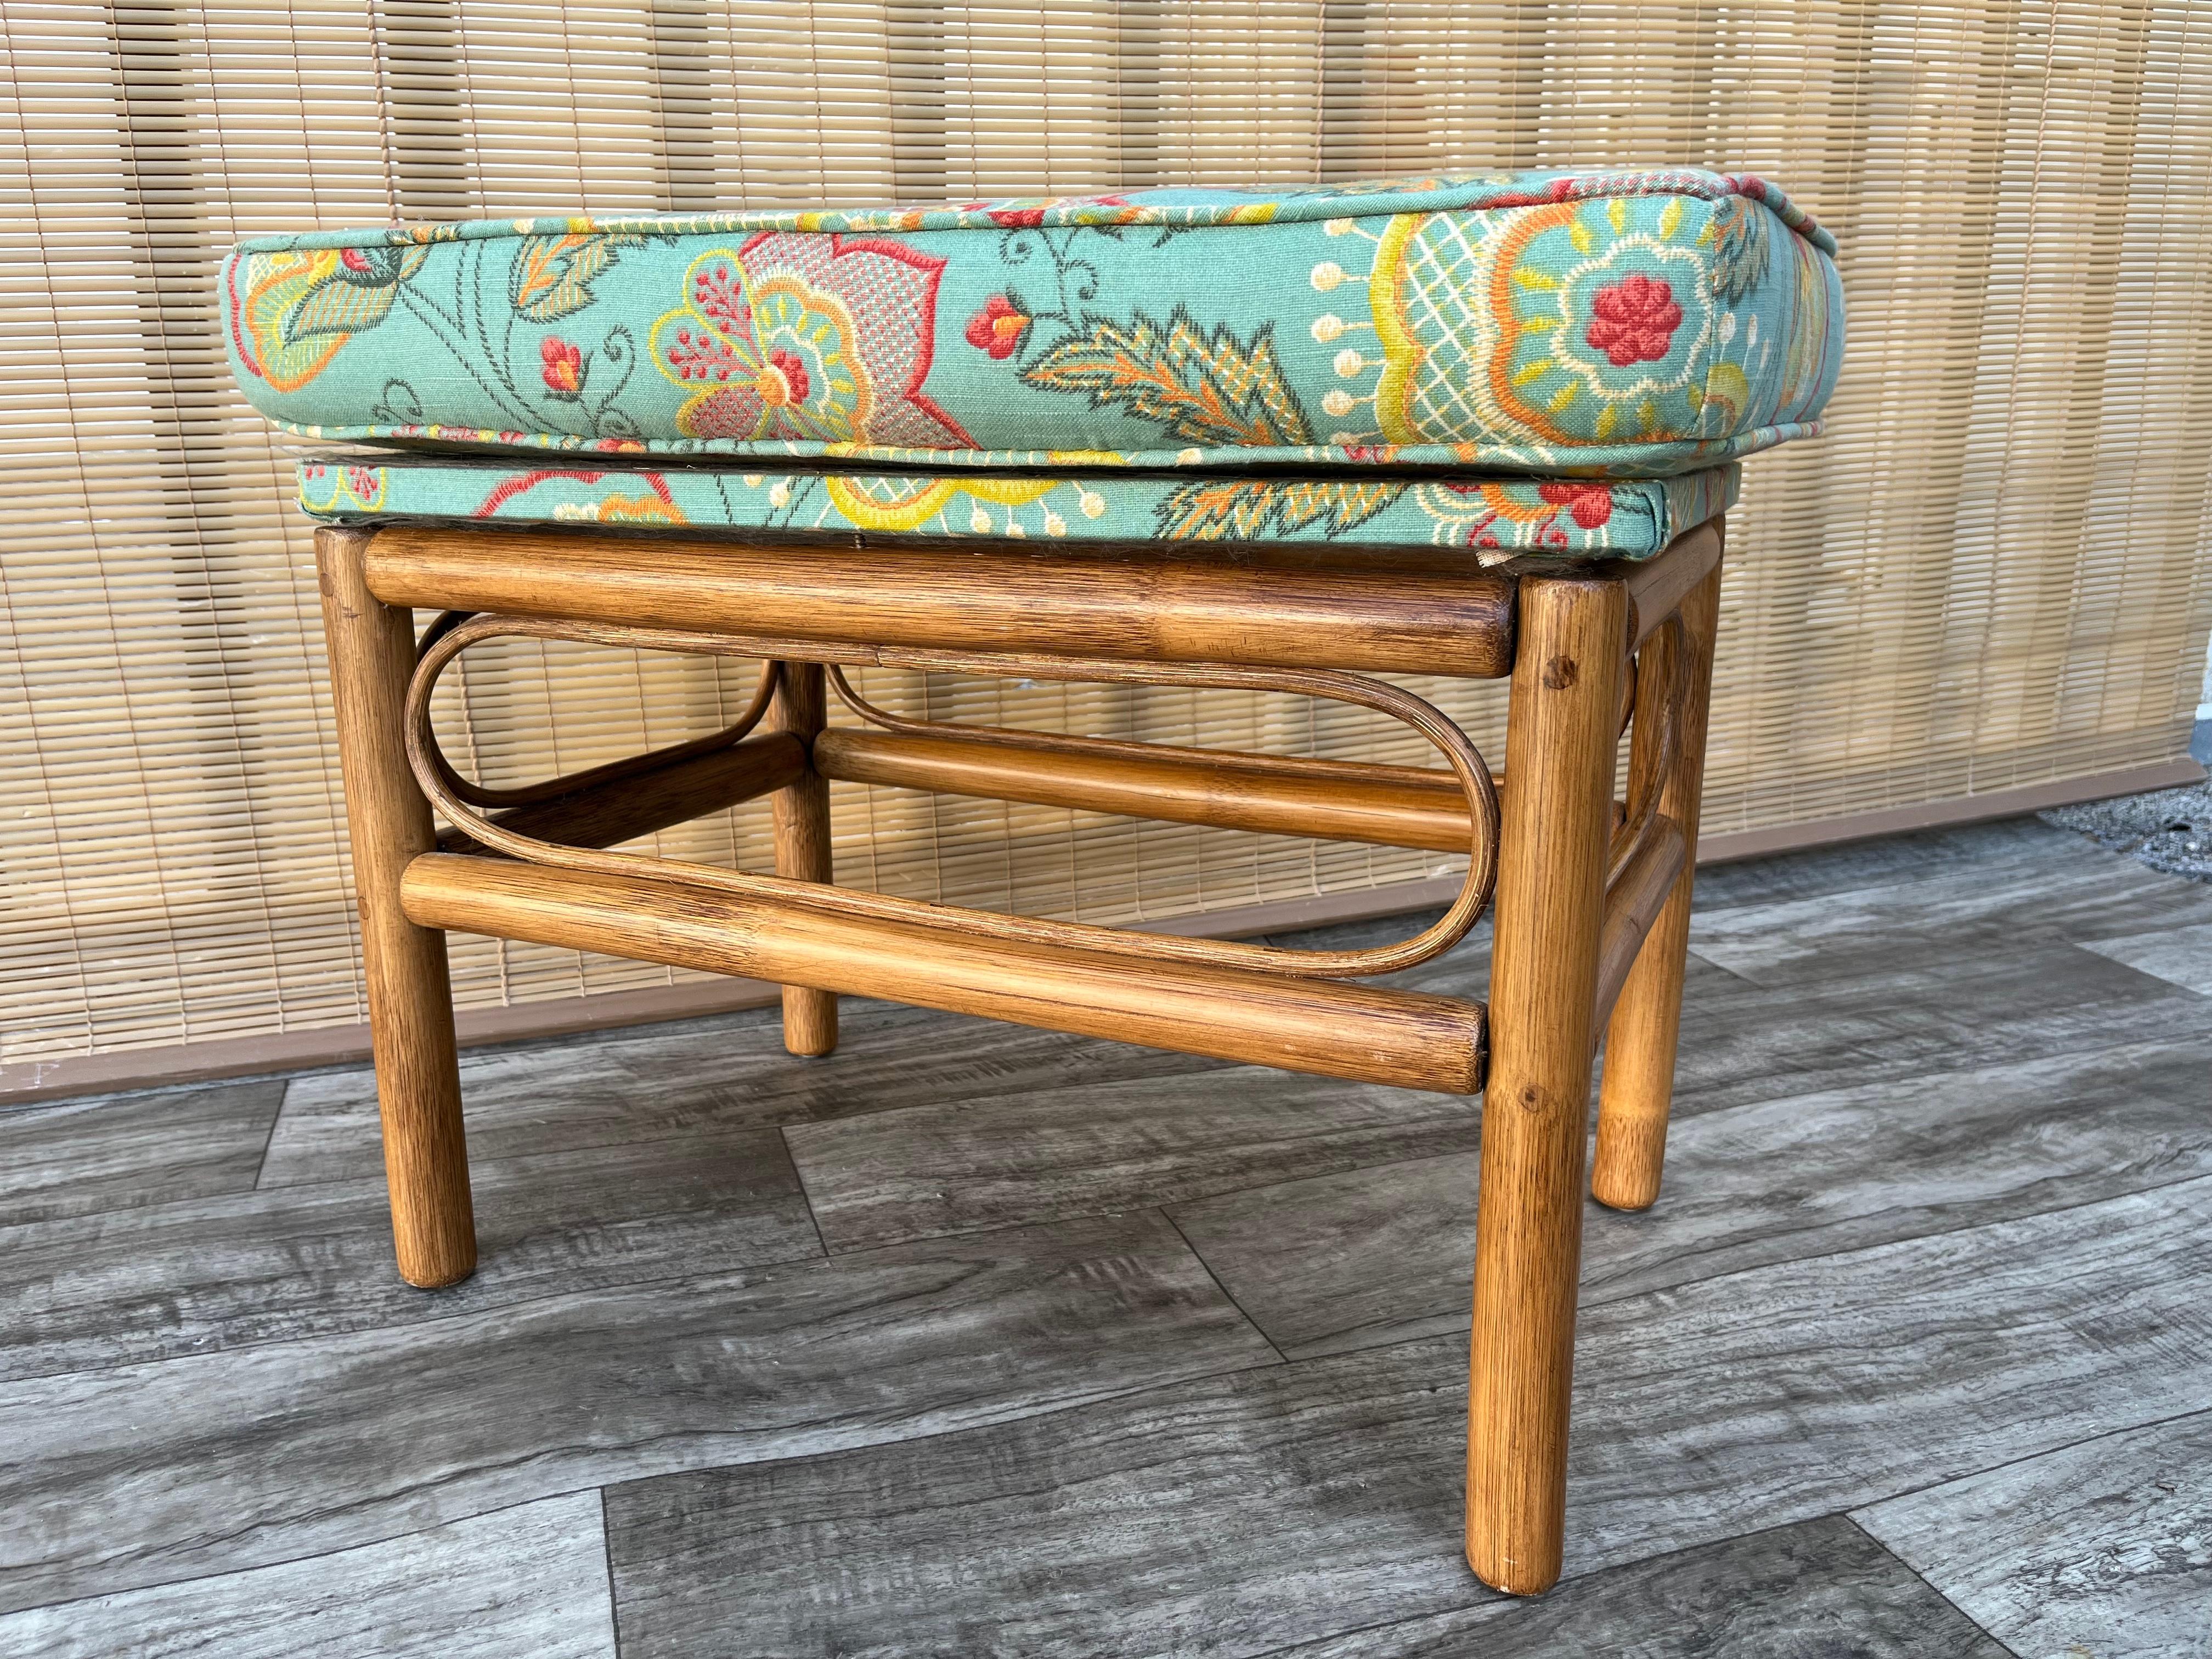 Vintage Coastal Style, Boho Chic Rattan Ottoman / Accent Bench In Good Condition For Sale In Miami, FL